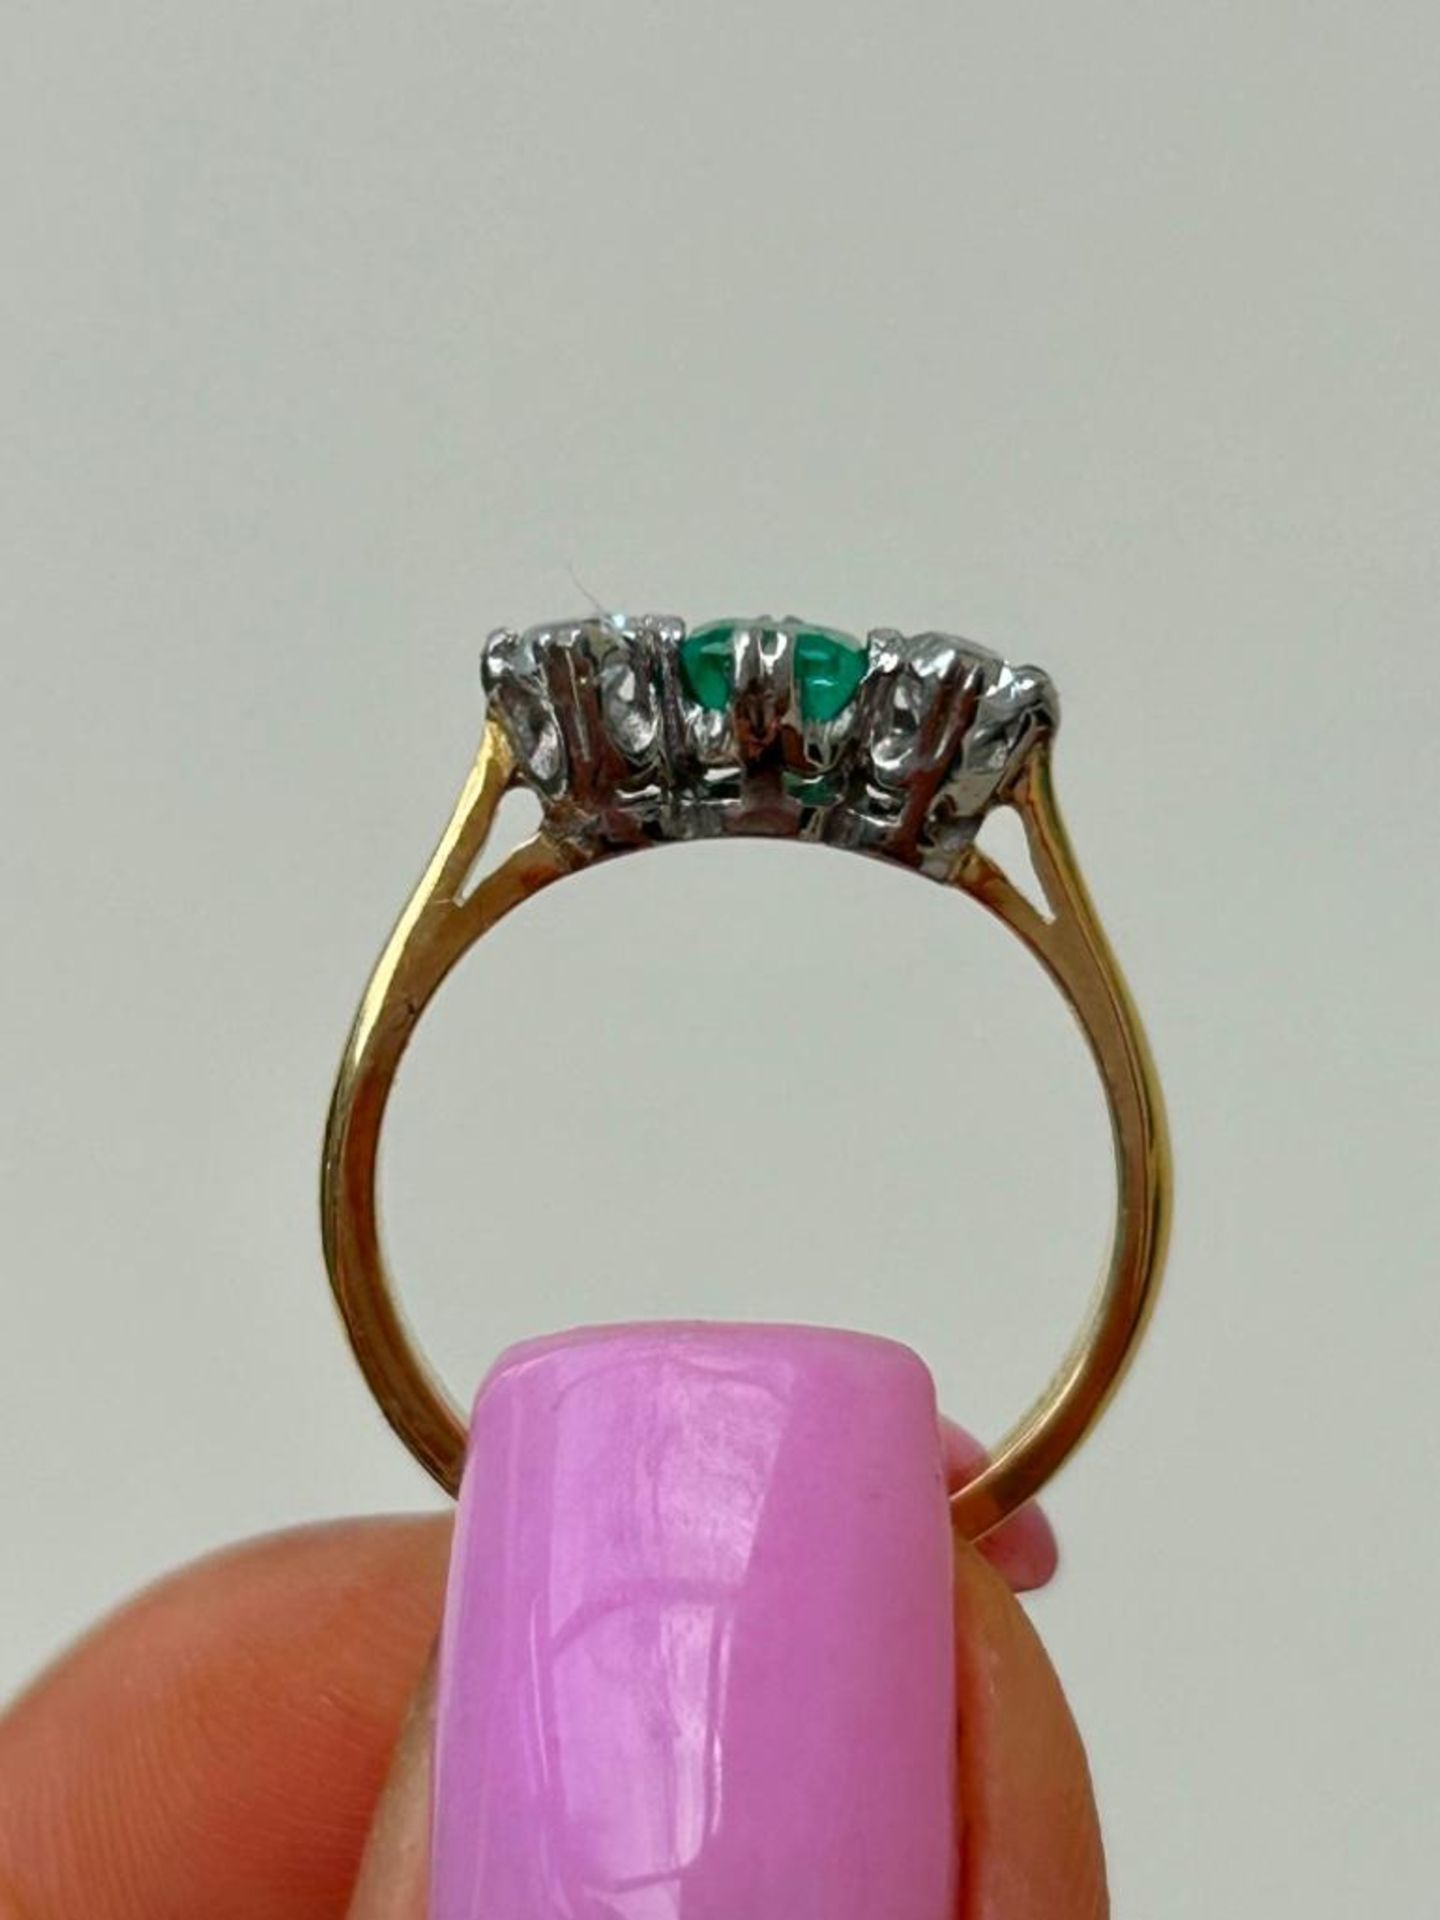 Antique 18ct Gold Emerald and Diamond 3 Stone Ring - Image 5 of 7